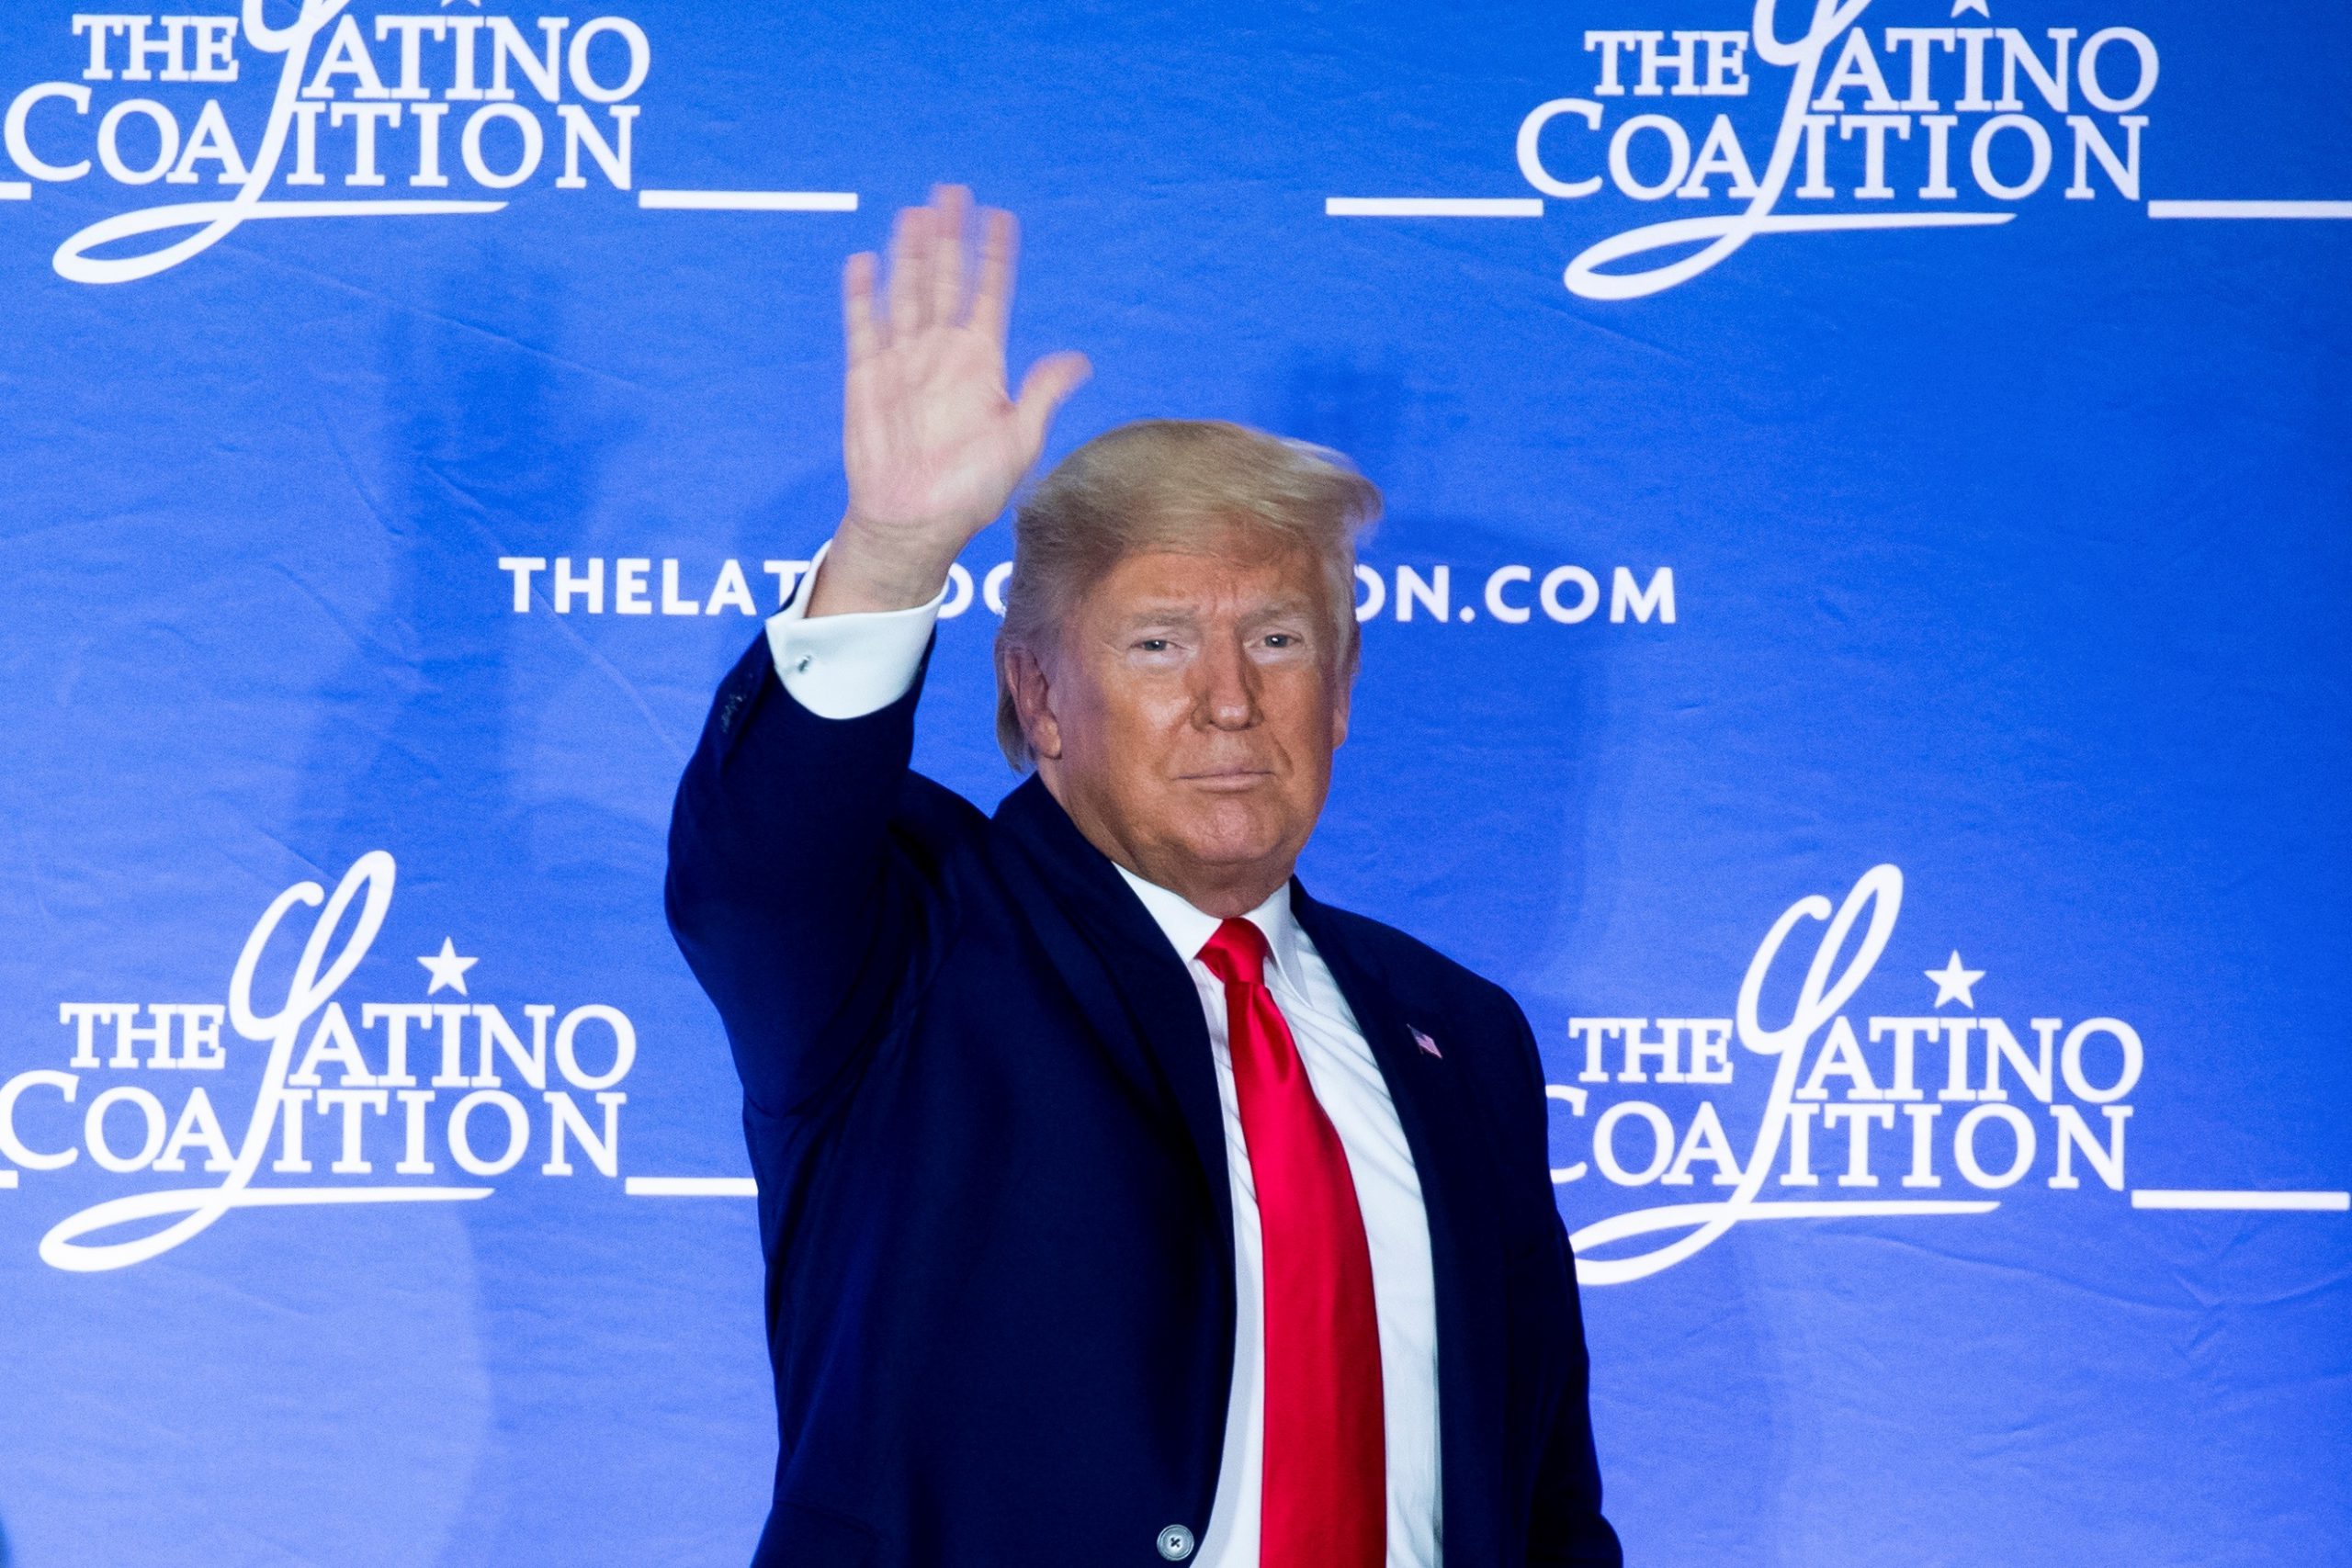 Washington (United States), 04/03/2020.- US President Donald J. Trump waves after delivering remarks at the Latino Coalition Legislative Summit in Washington, DC, USA, 04 March 2020. Trump took the opportunity to discuss the US goverment's response to the coronavirus outbreak. (Lanzamiento de disco, Estados Unidos) EFE/EPA/MICHAEL REYNOLDS